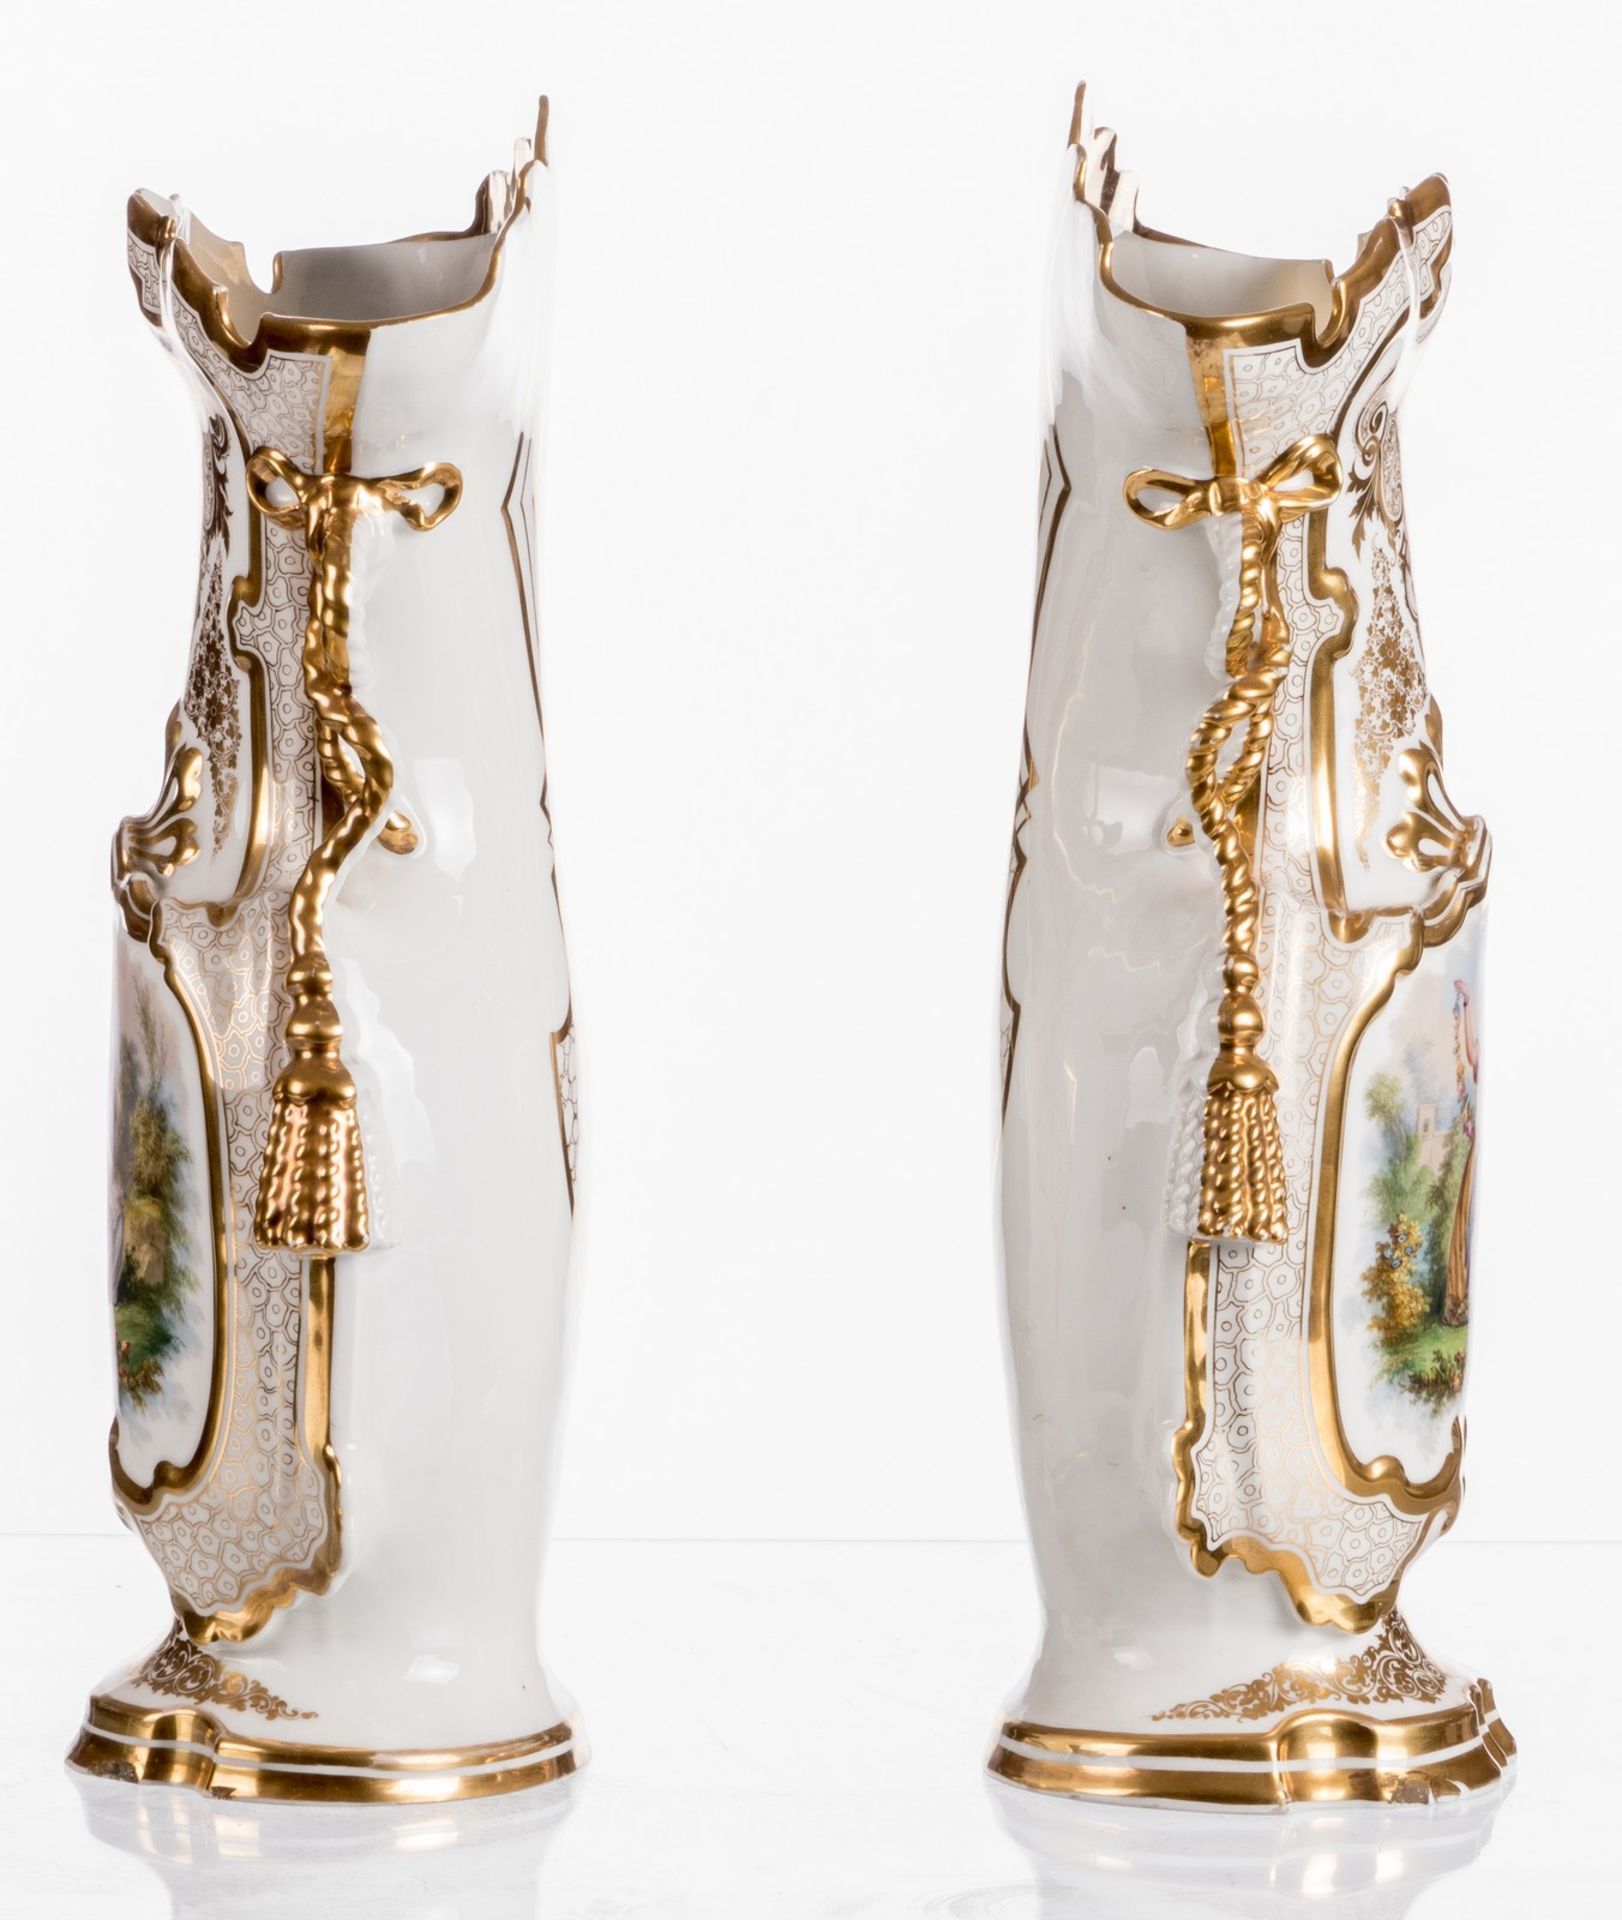 A pair of ornamental vases in Brussels porcelain depicting gallant ladies, the gold paint in good - Image 2 of 14